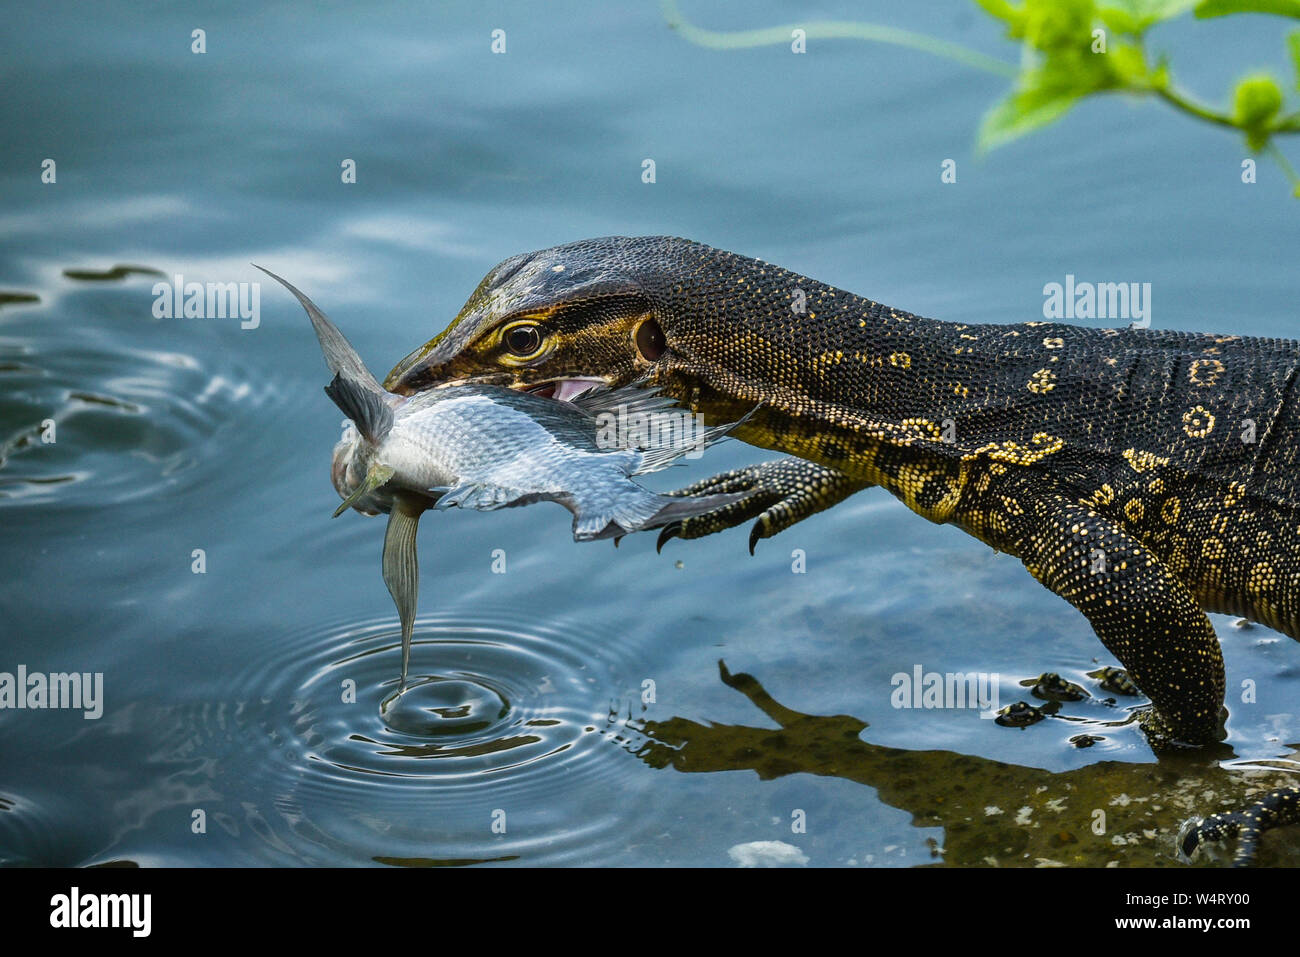 Monitor lizard by a pond with a fish in its mouth, Indonesia Stock Photo